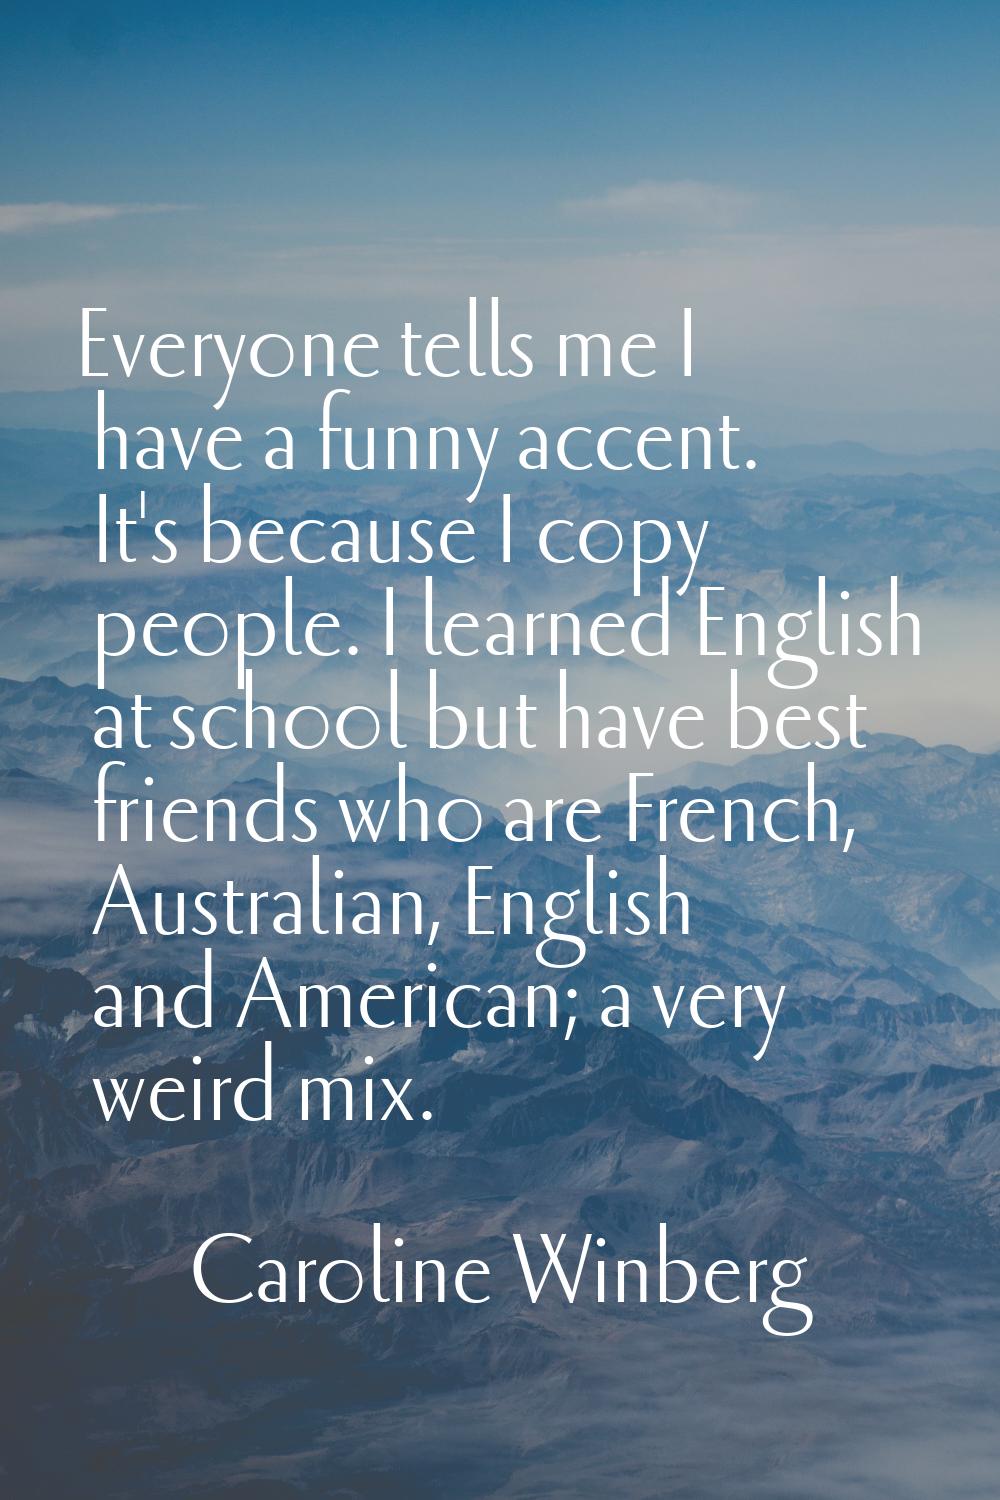 Everyone tells me I have a funny accent. It's because I copy people. I learned English at school bu